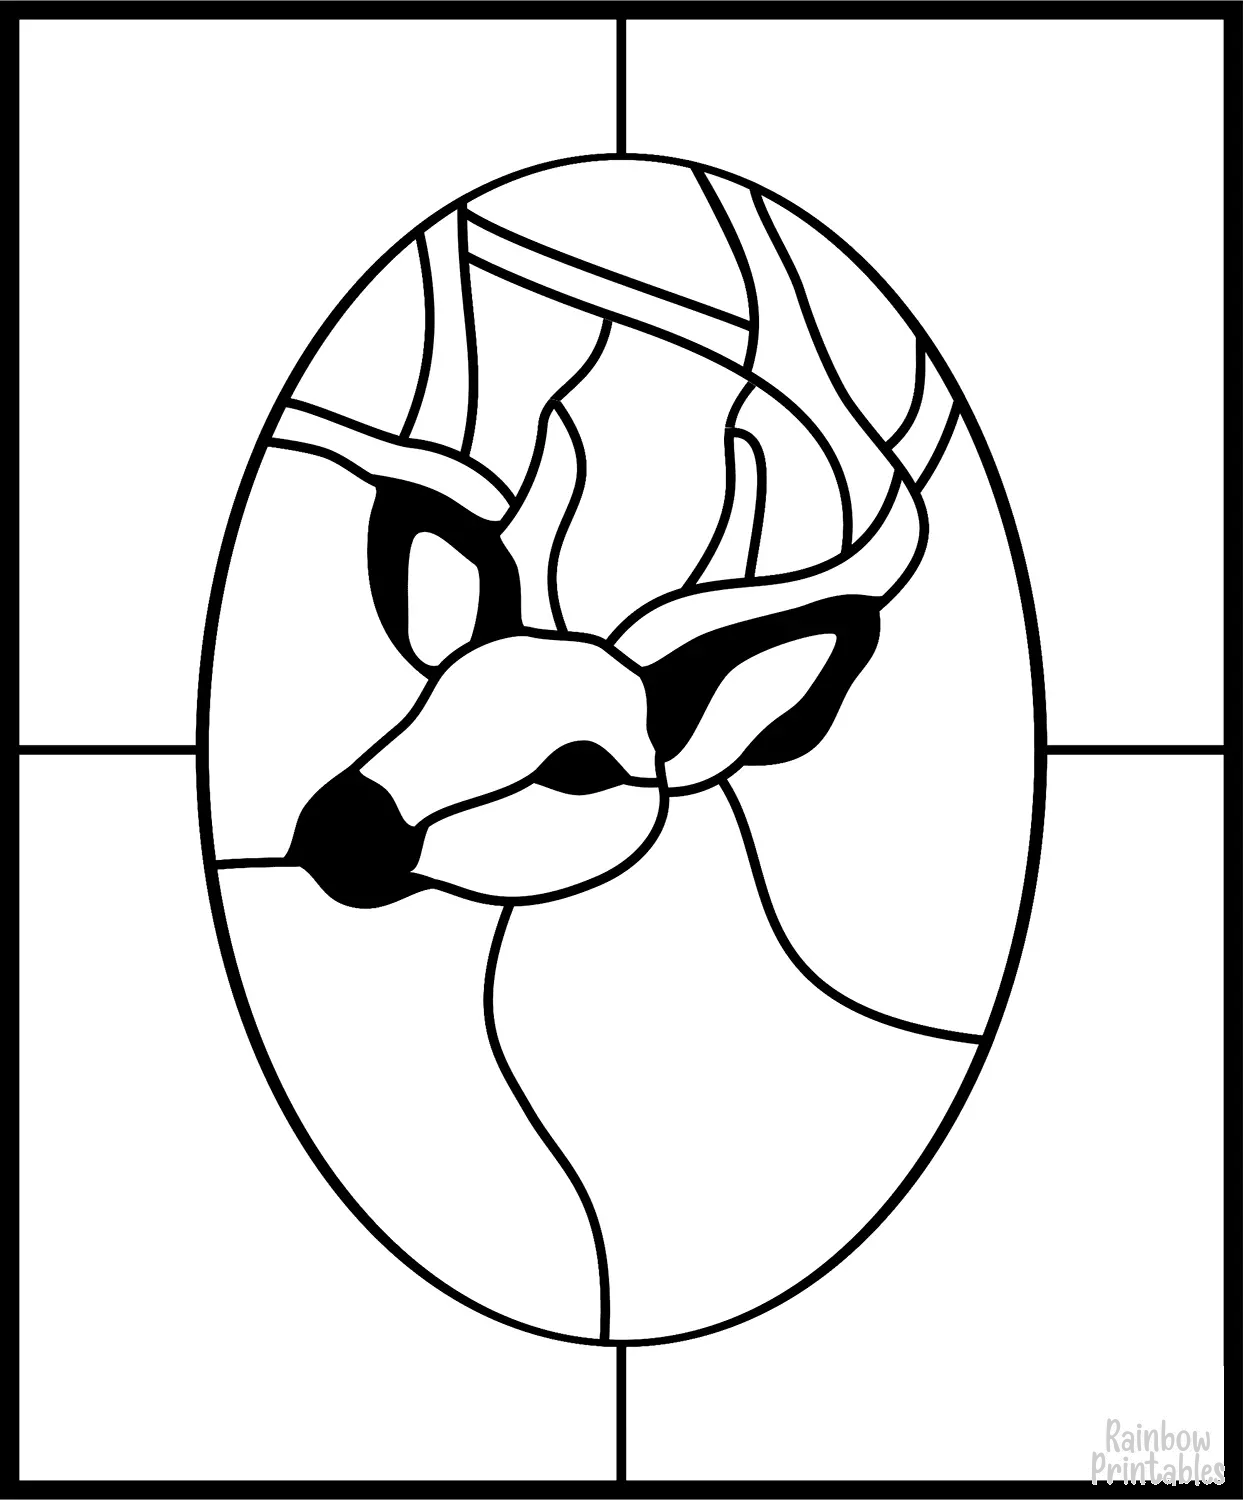 STAINED GLASS DEER ANTLERS ANIMAL Clipart Coloring Pages for Kids Adults Art Activities Line Art